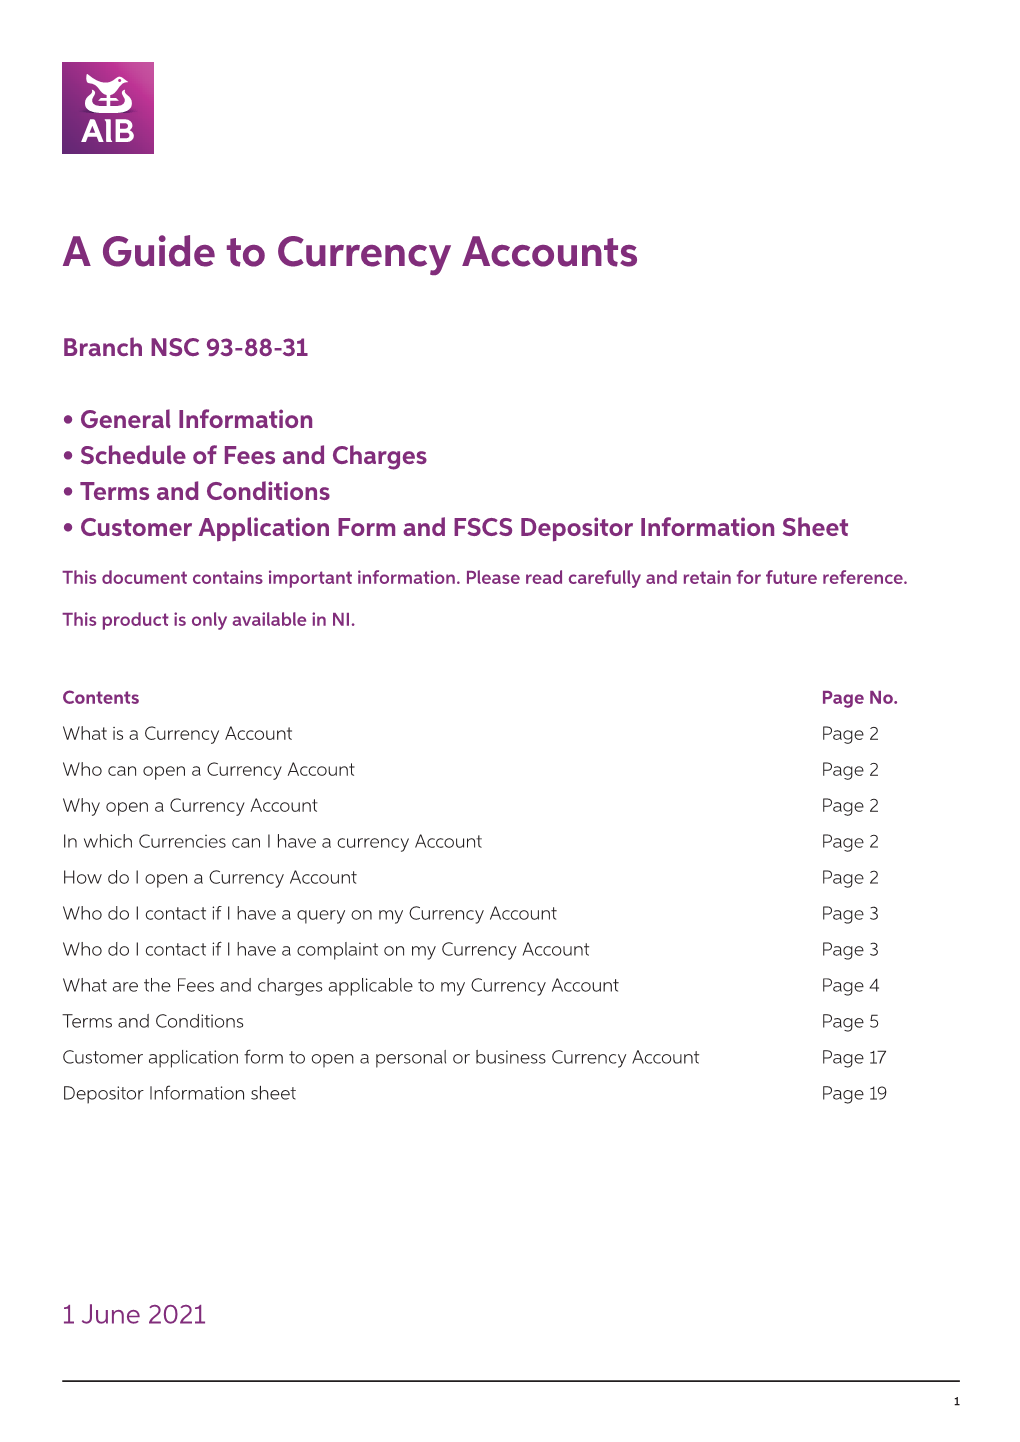 A Guide to Currency Accounts